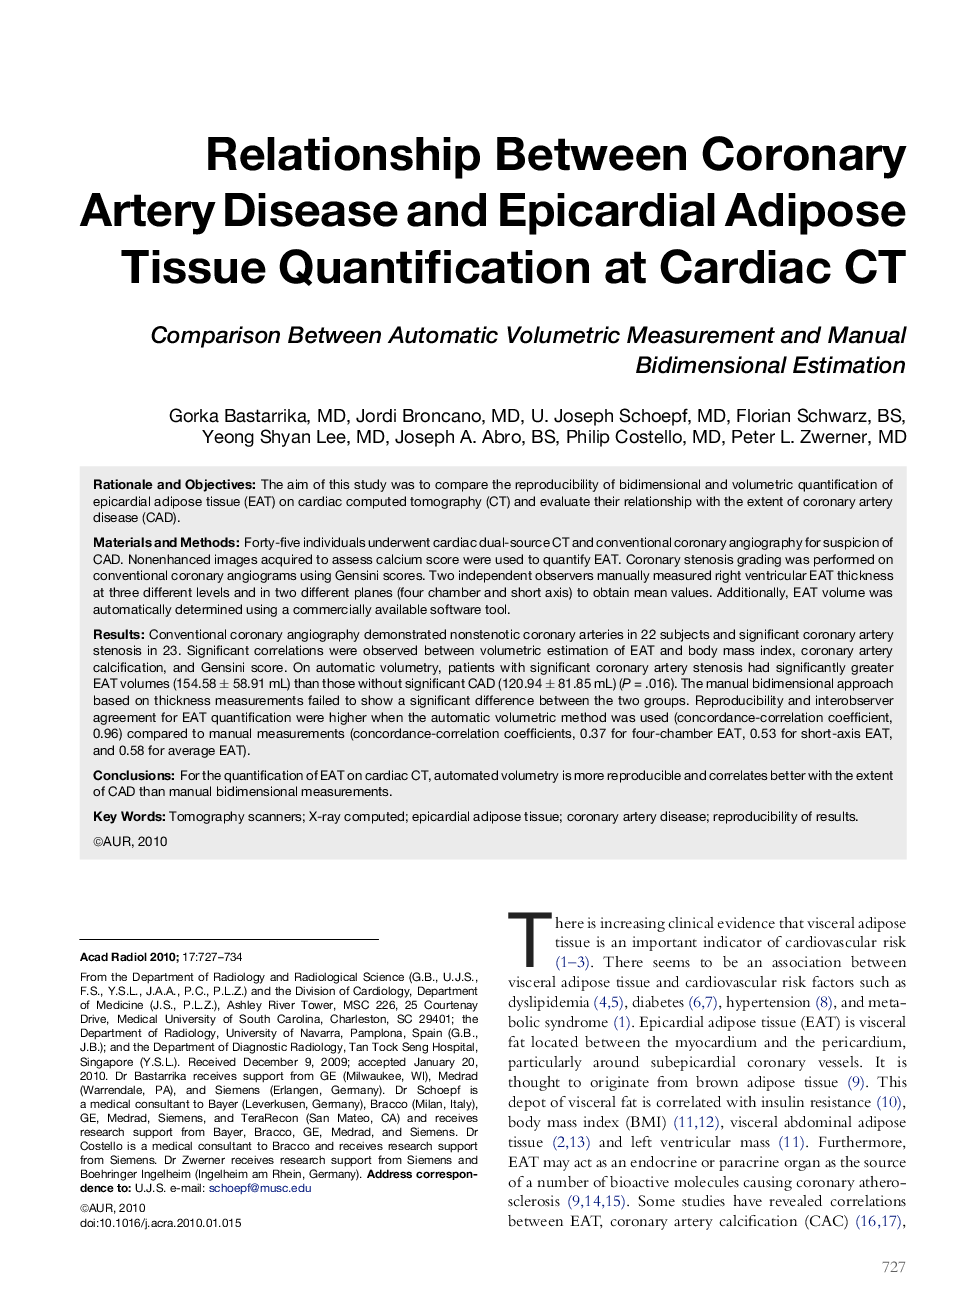 Relationship Between Coronary Artery Disease and Epicardial Adipose Tissue Quantification at Cardiac CT